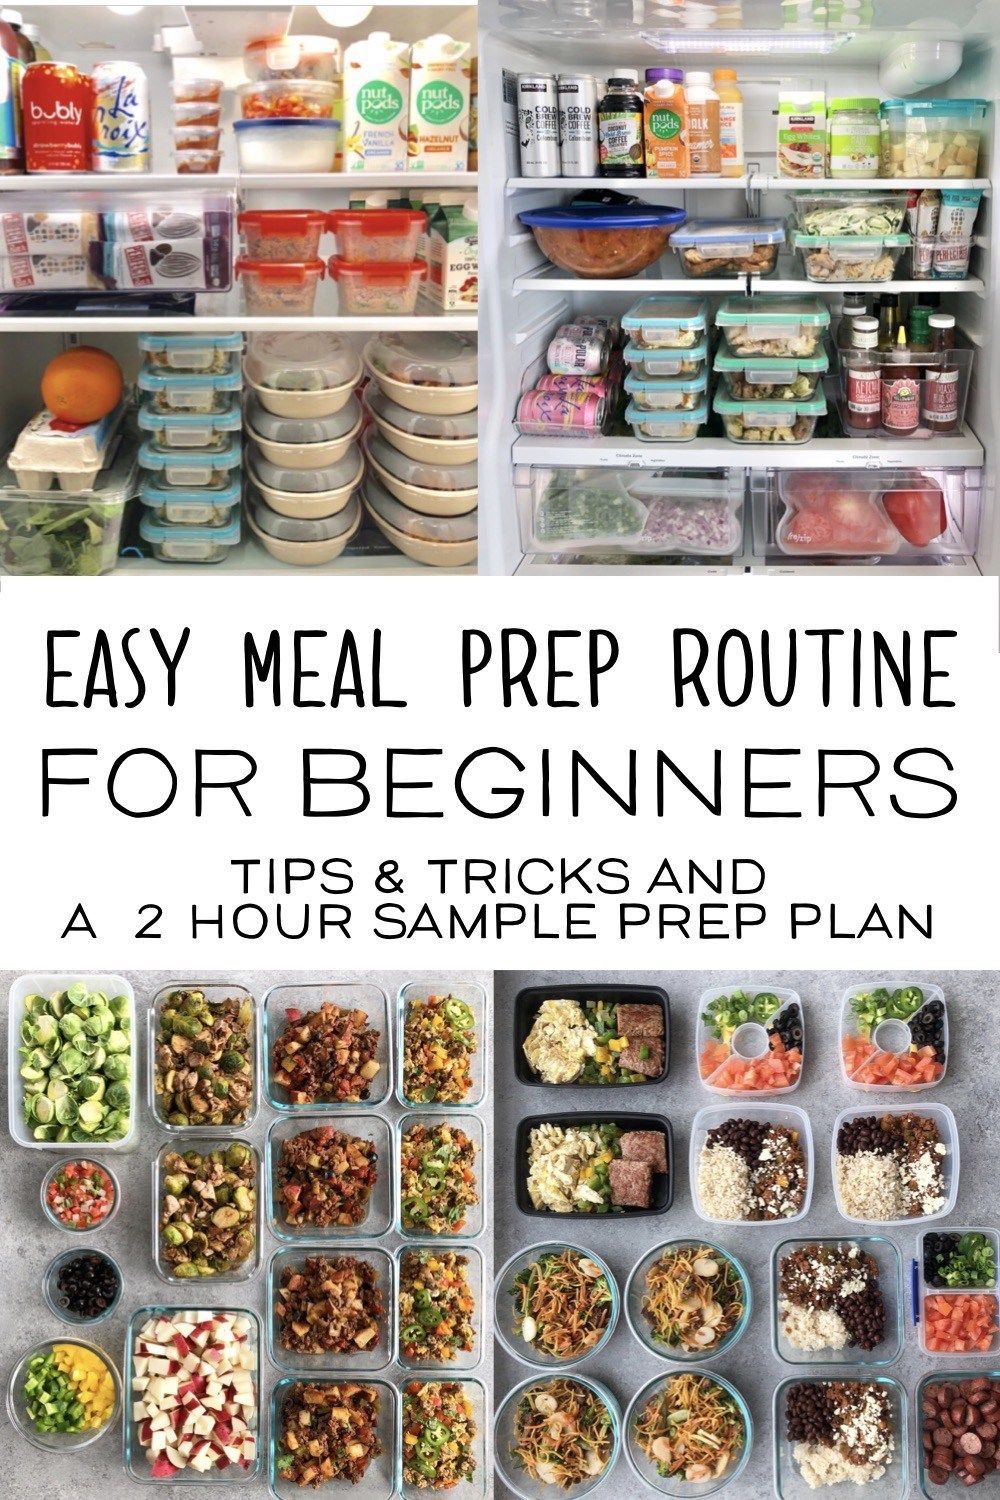 How To Meal Prep Like A Champ: My Weekly Meal Prep Routine -   18 meal prep recipes for the week ideas